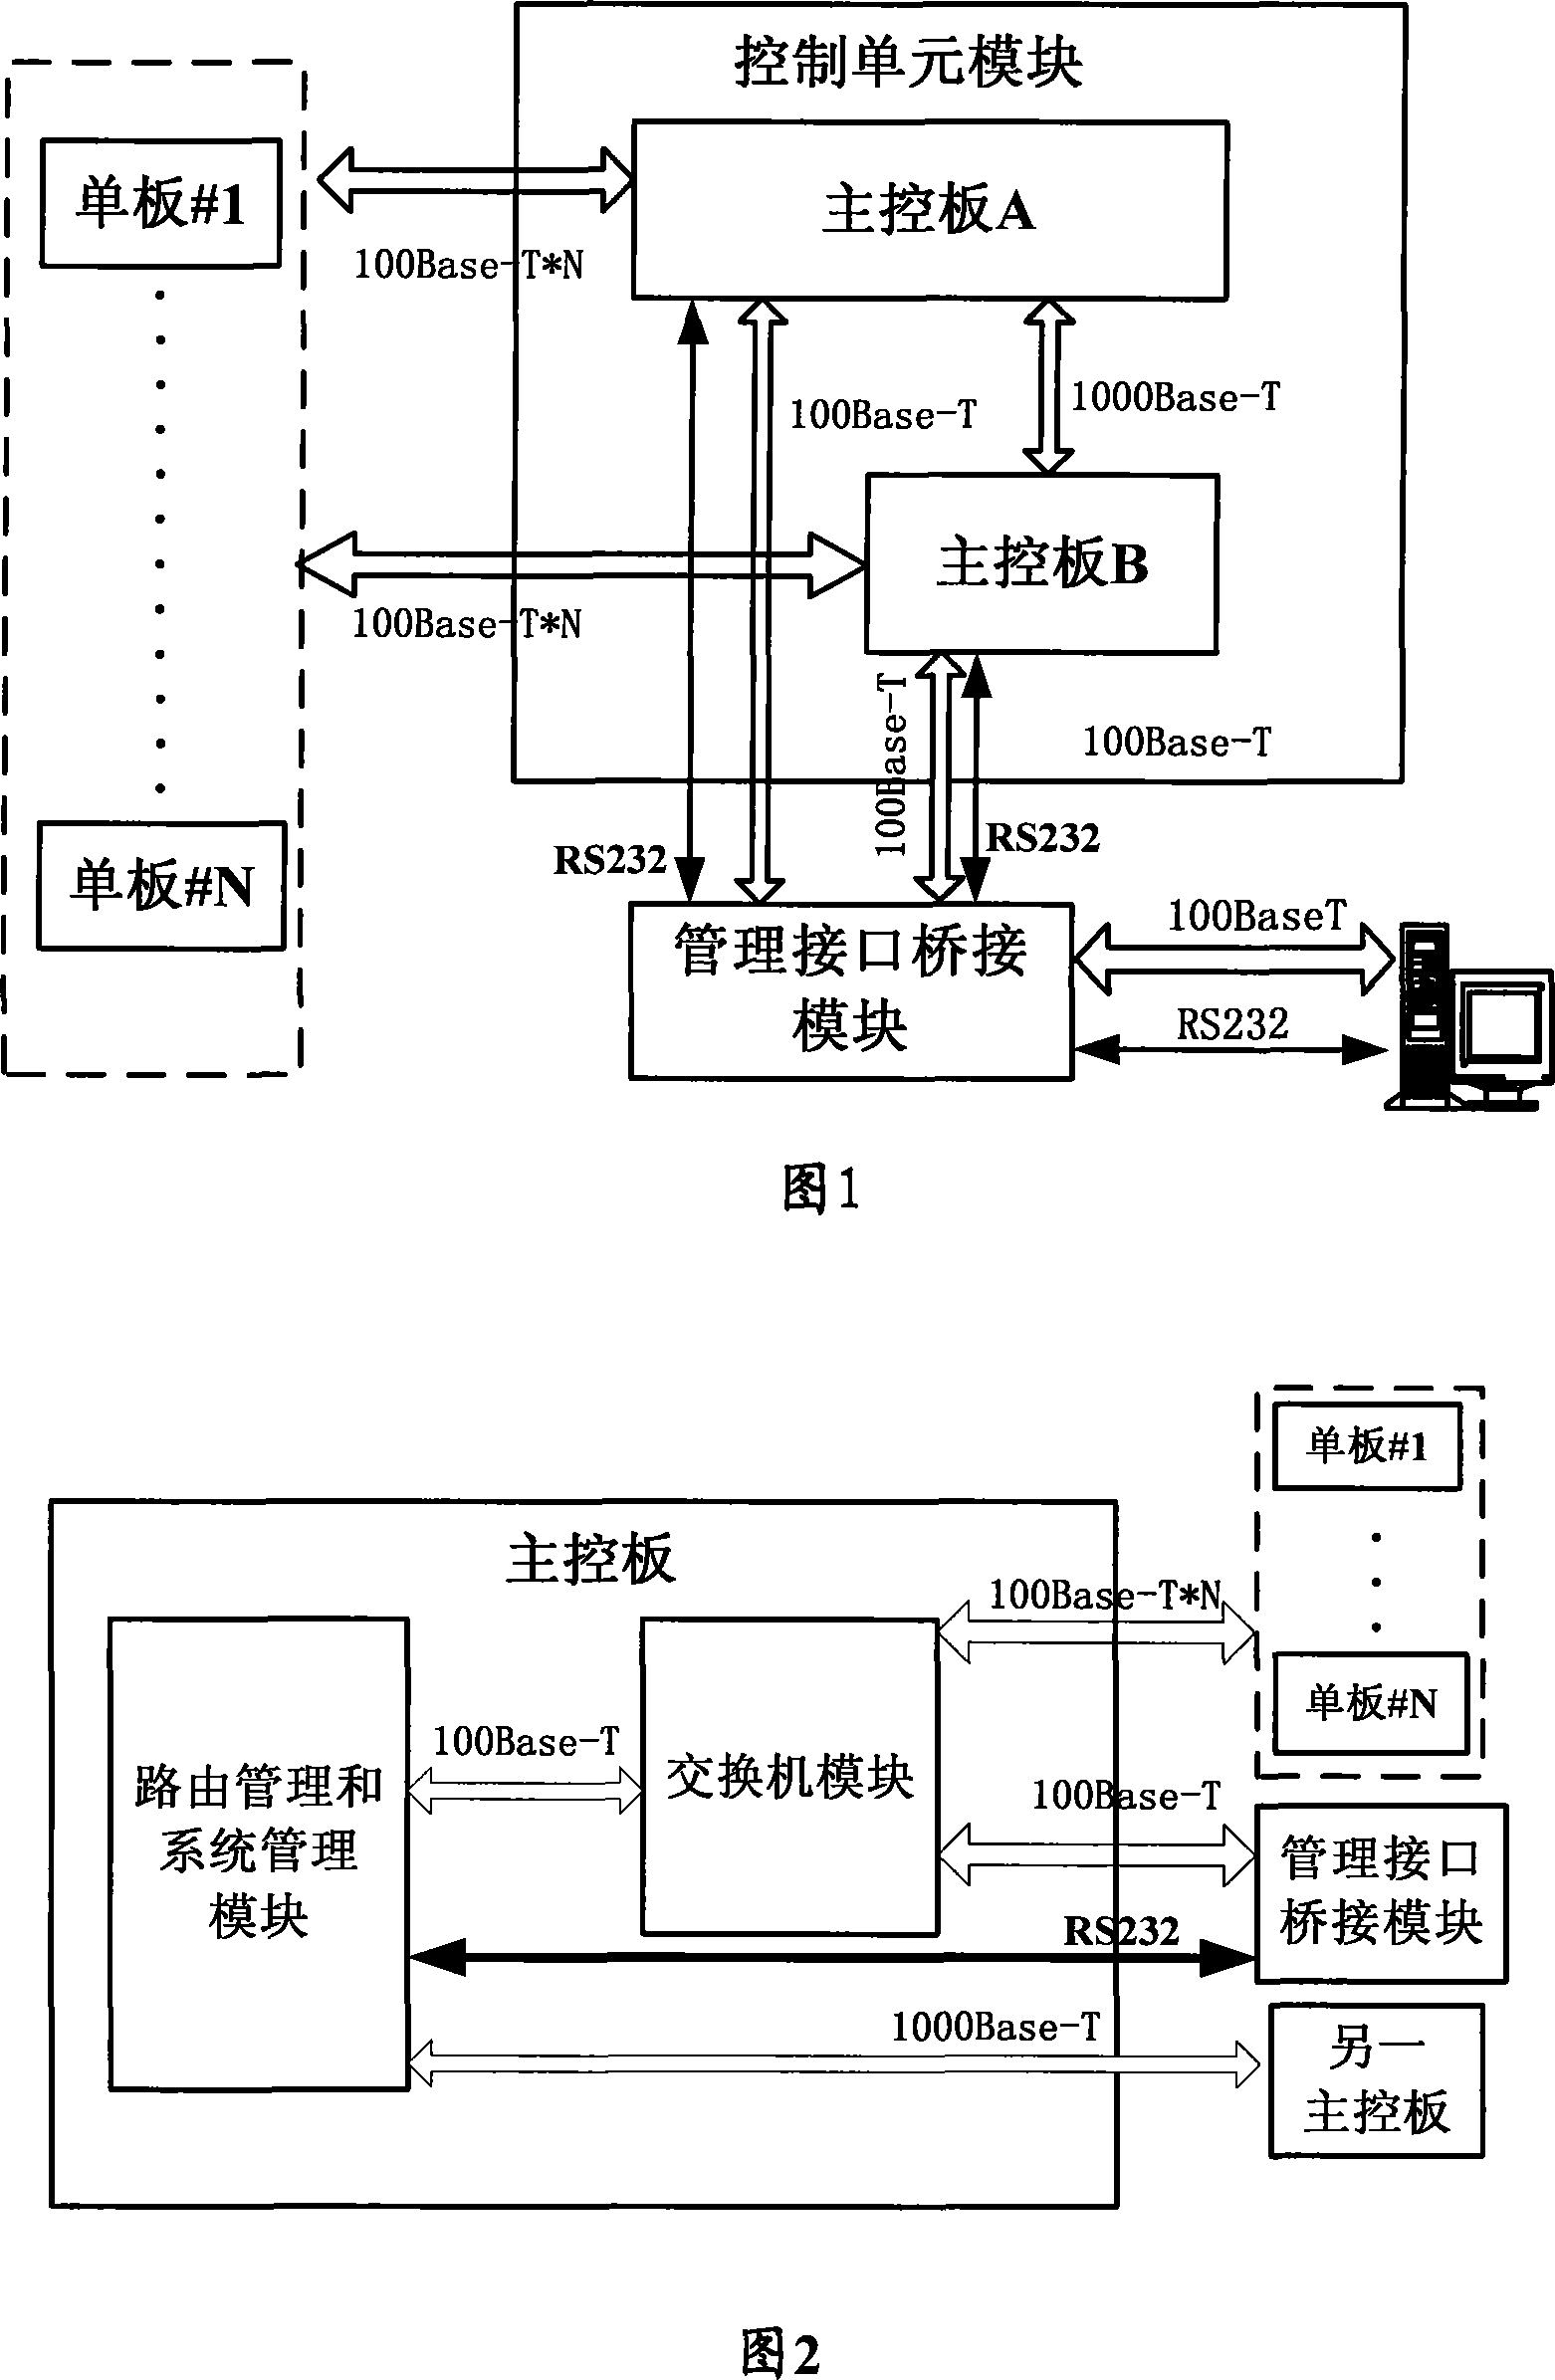 Interface management device for broadband remote access server